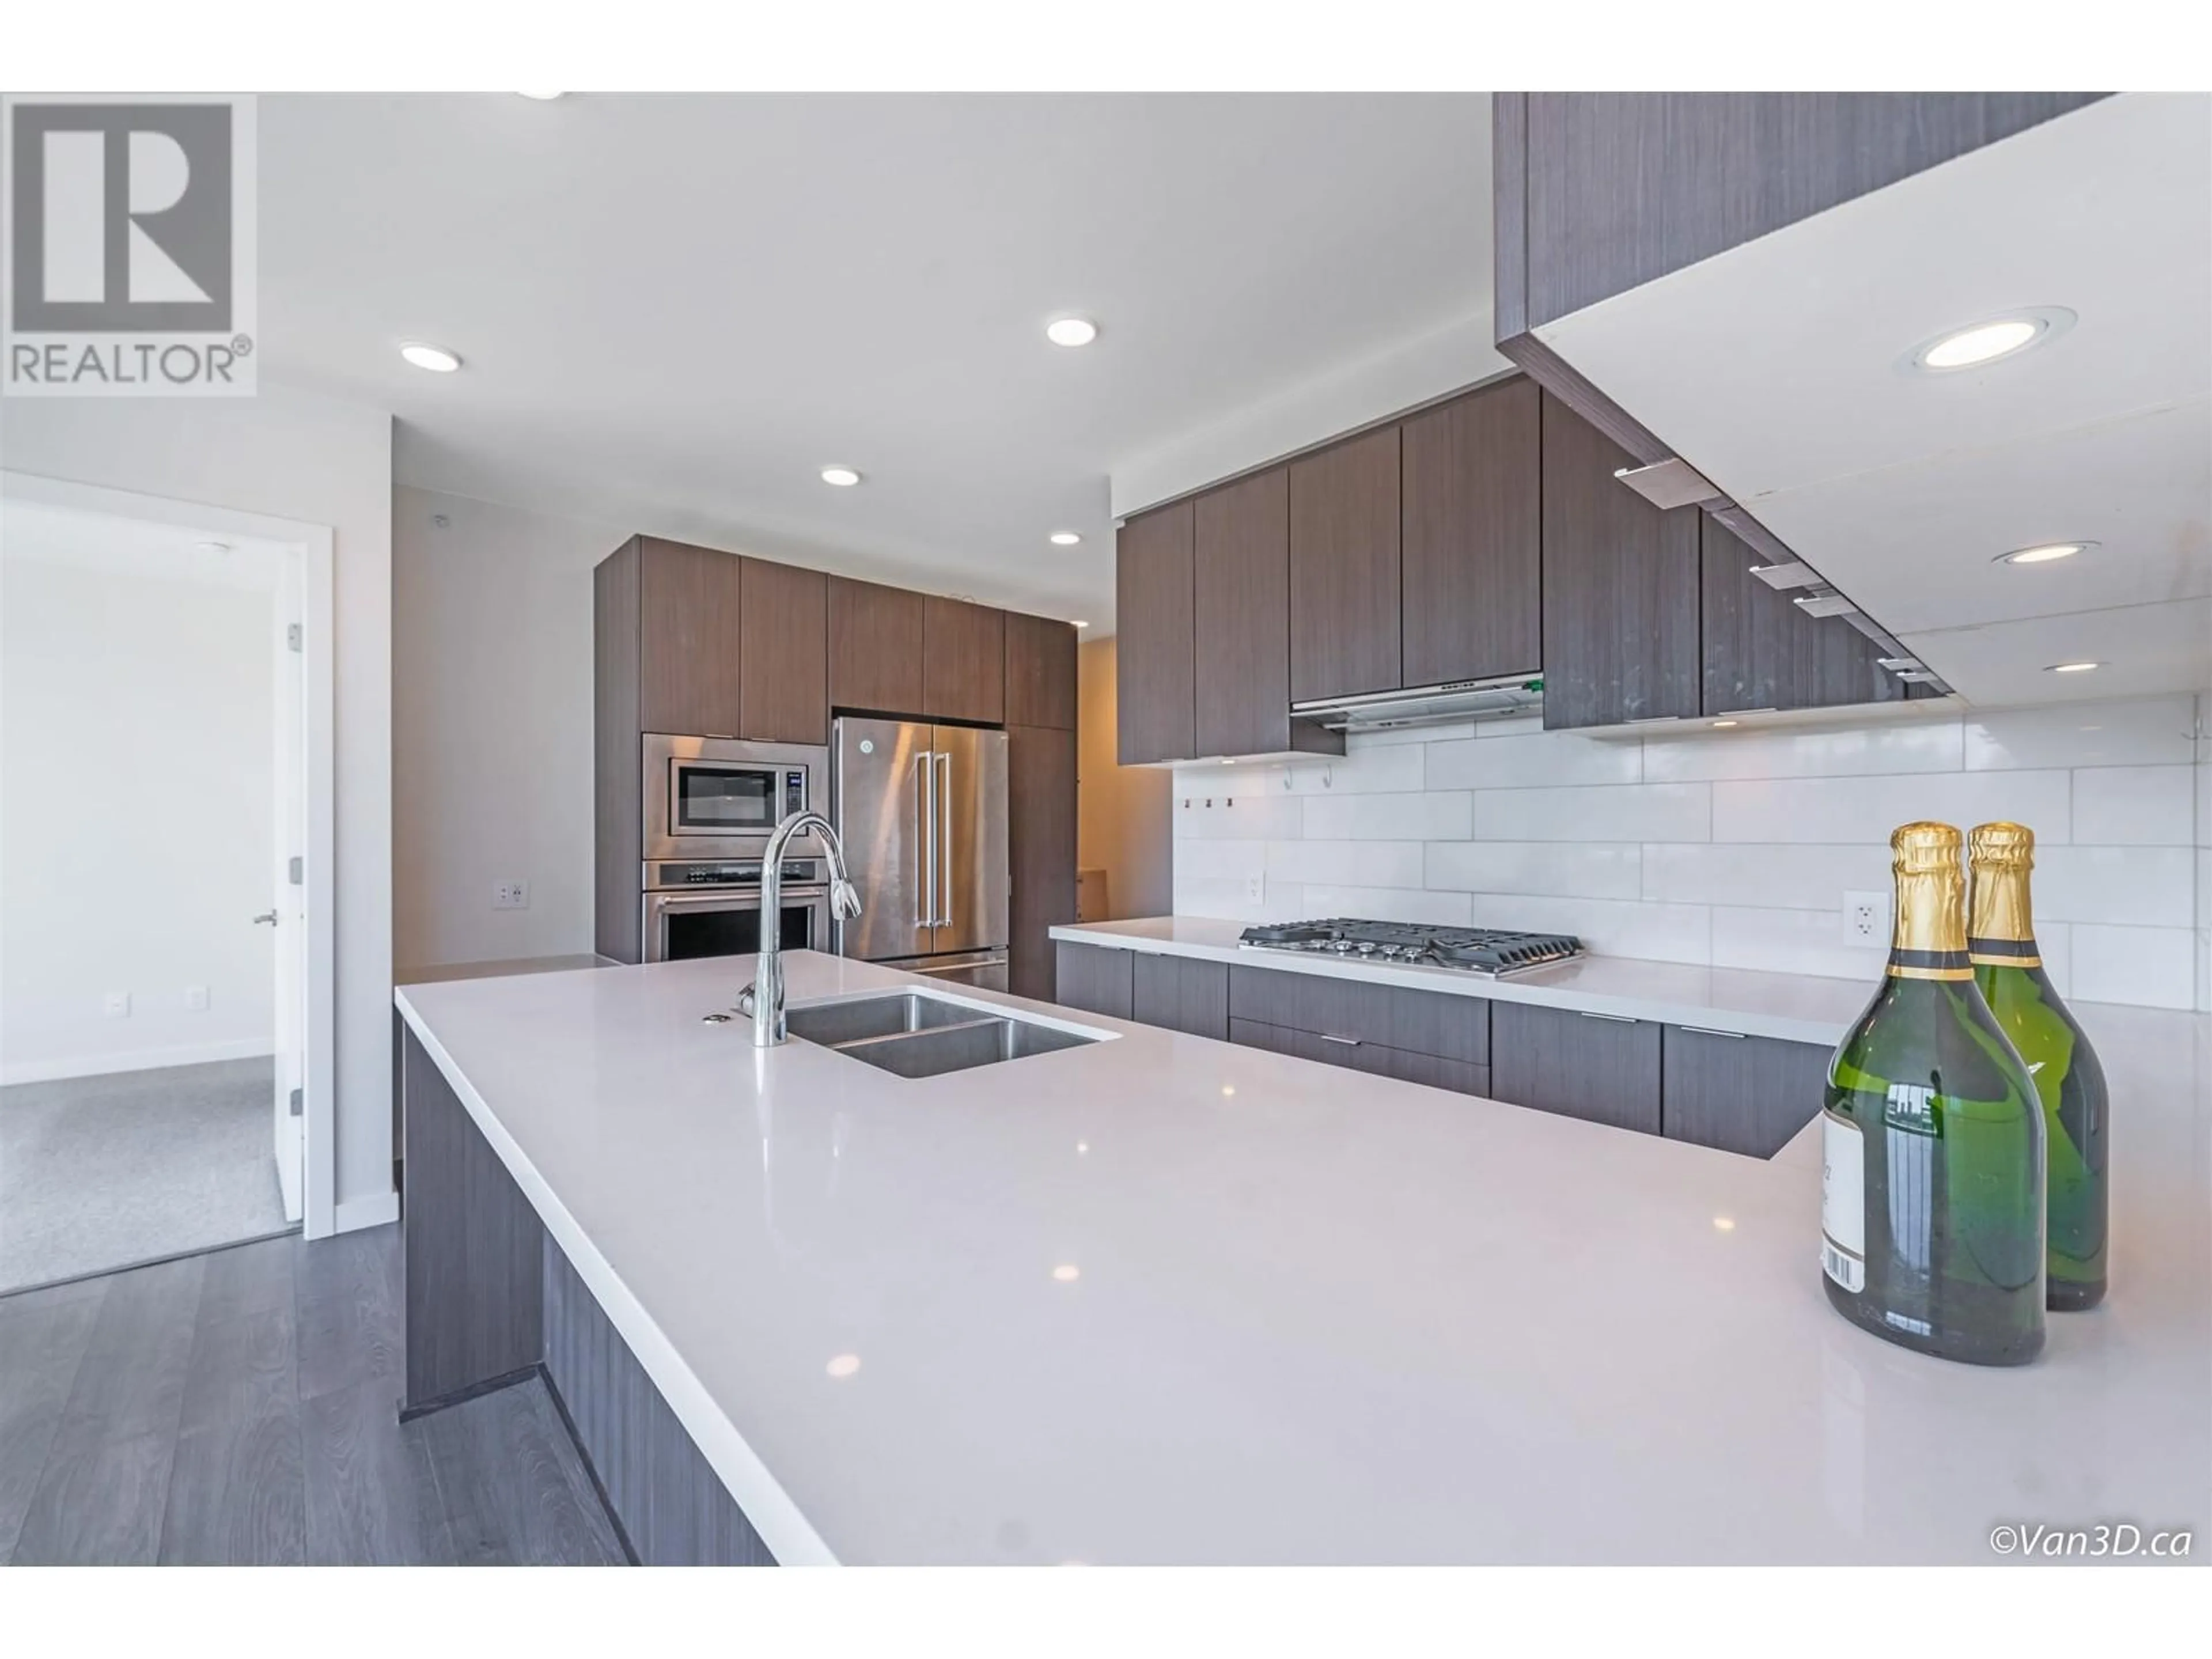 Contemporary kitchen for 704 530 WHITING WAY, Coquitlam British Columbia V3J0J4